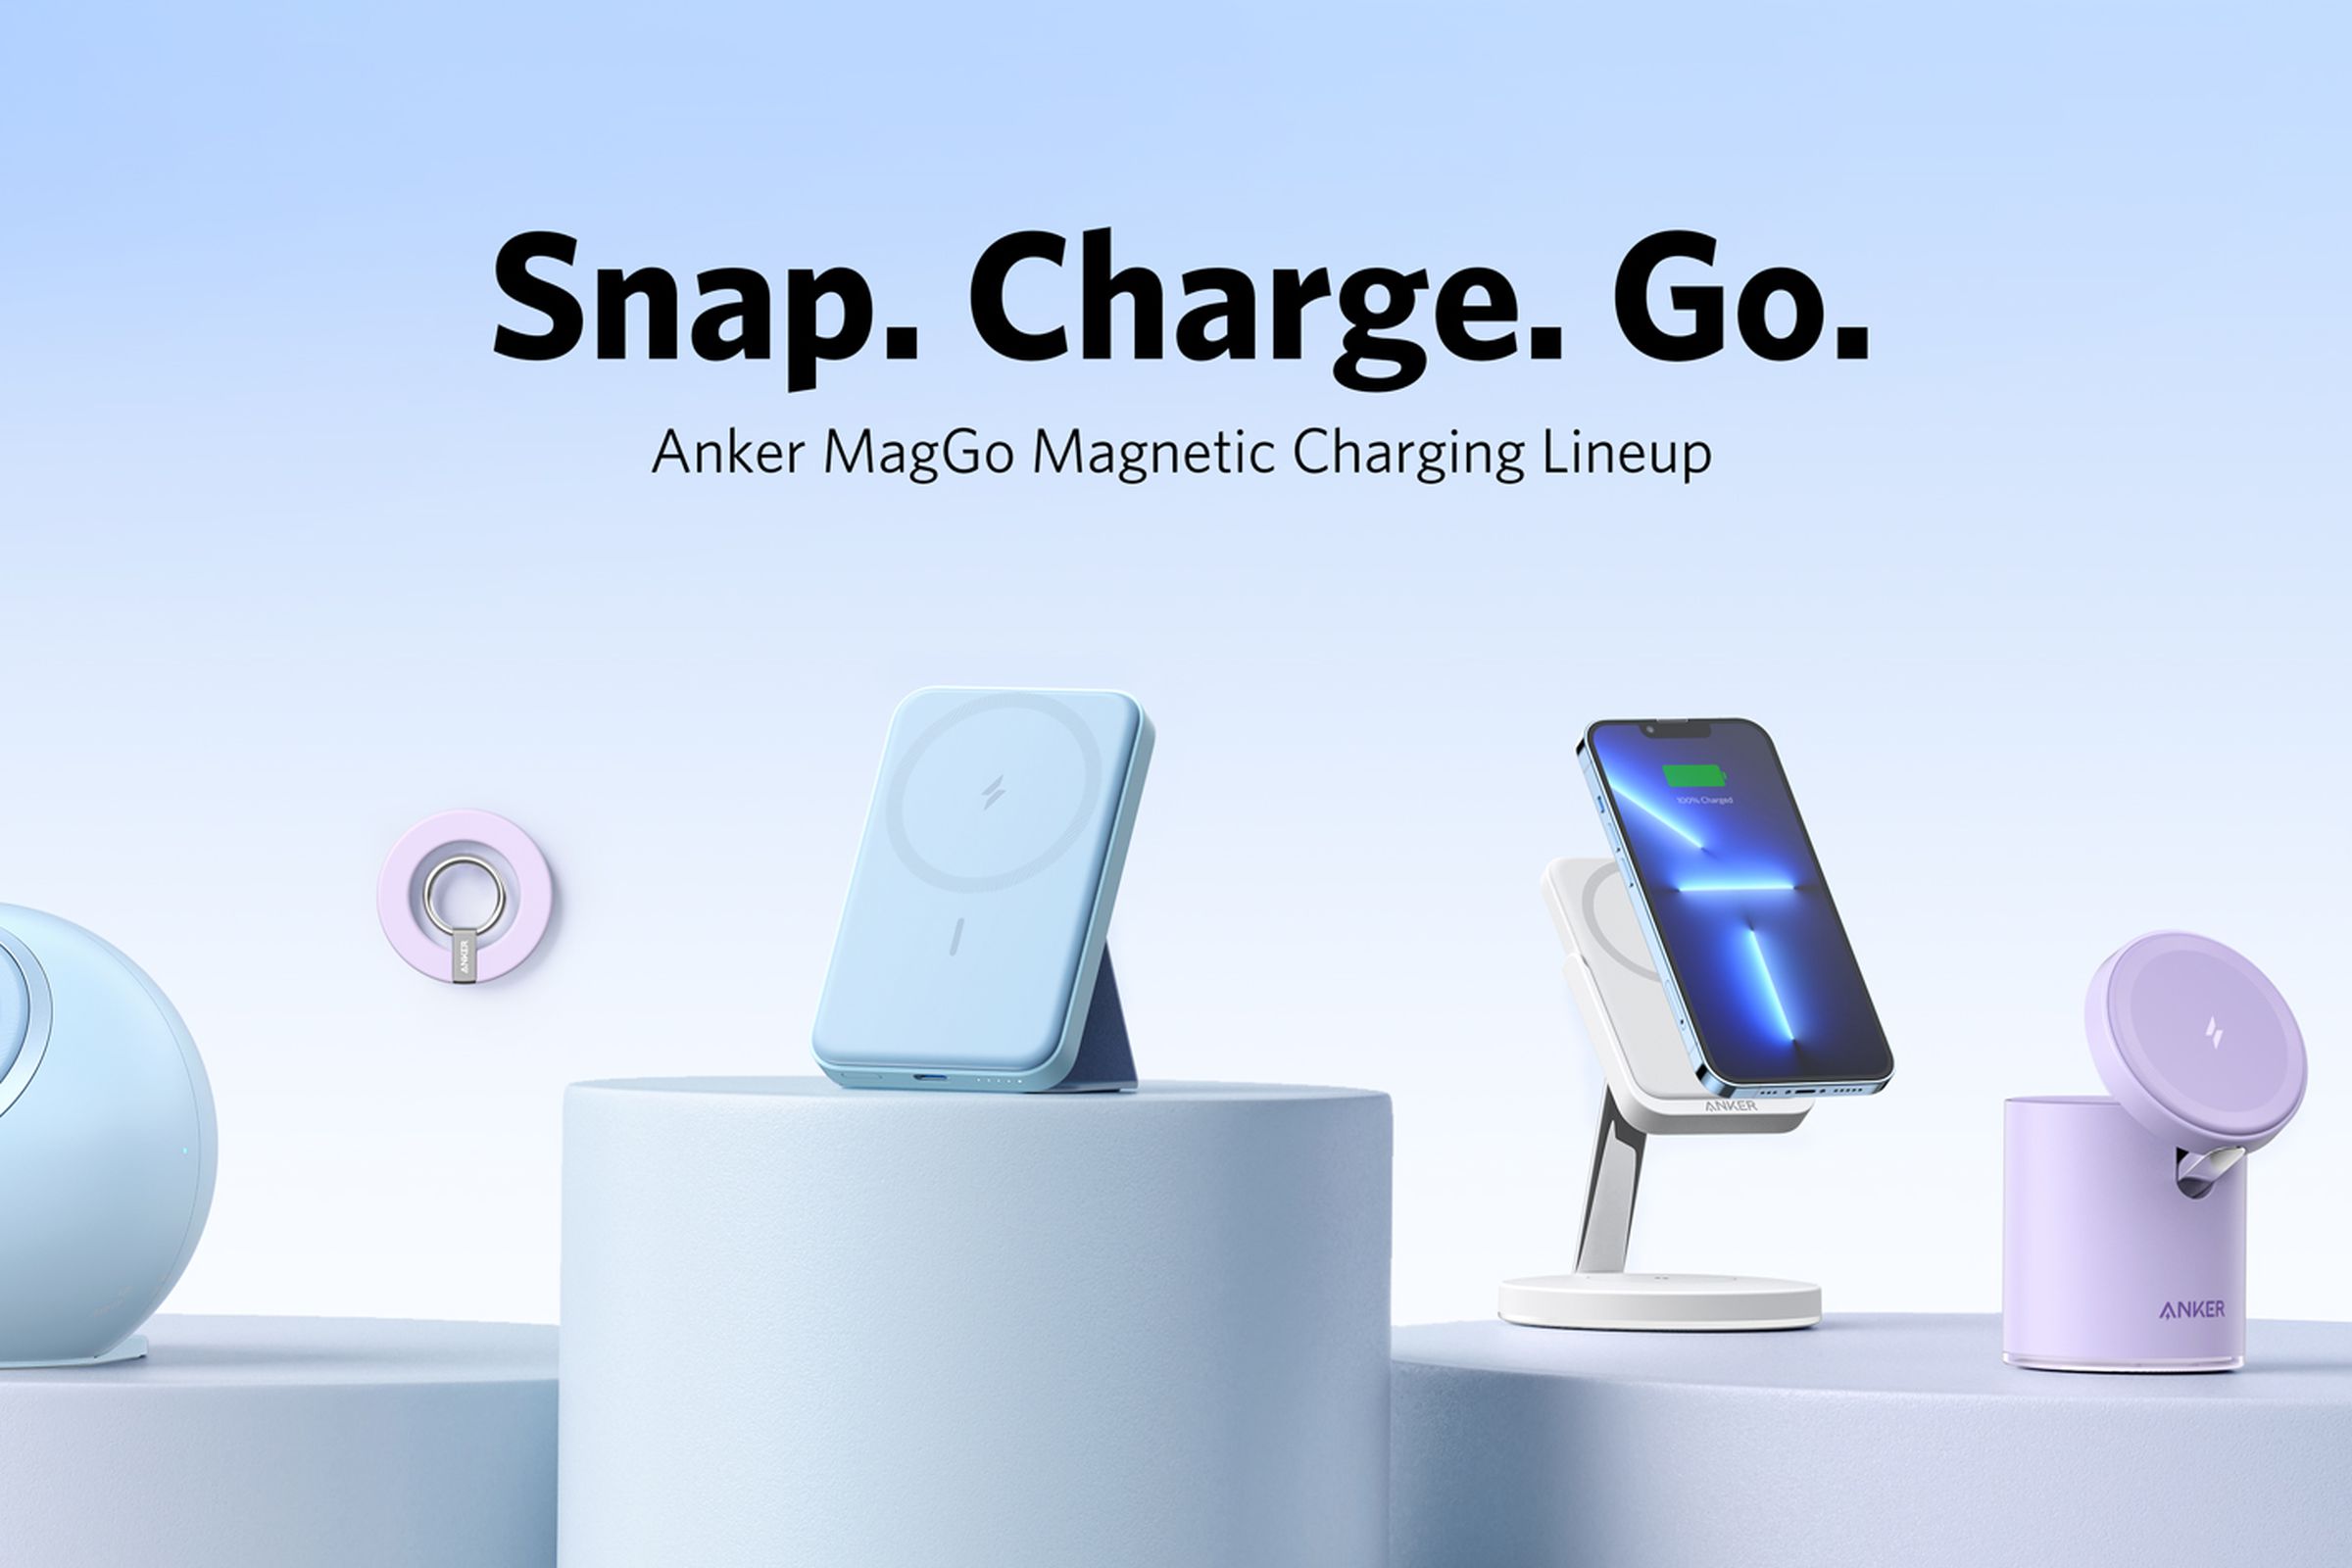 Anker is introducing MagGo, its lineup of six MagSafe-compatible products for iPhones.